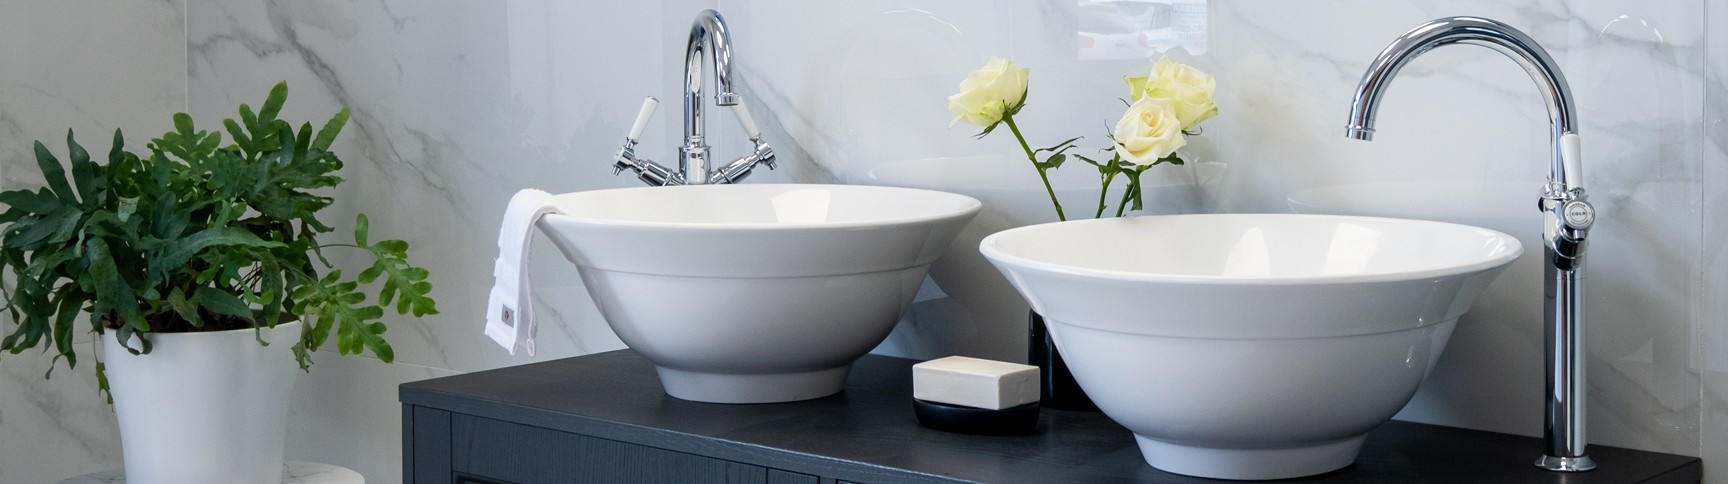 Freestanding Basins | Latest Trends & Designs | World of Tiles Bathrooms and Wood Flooring